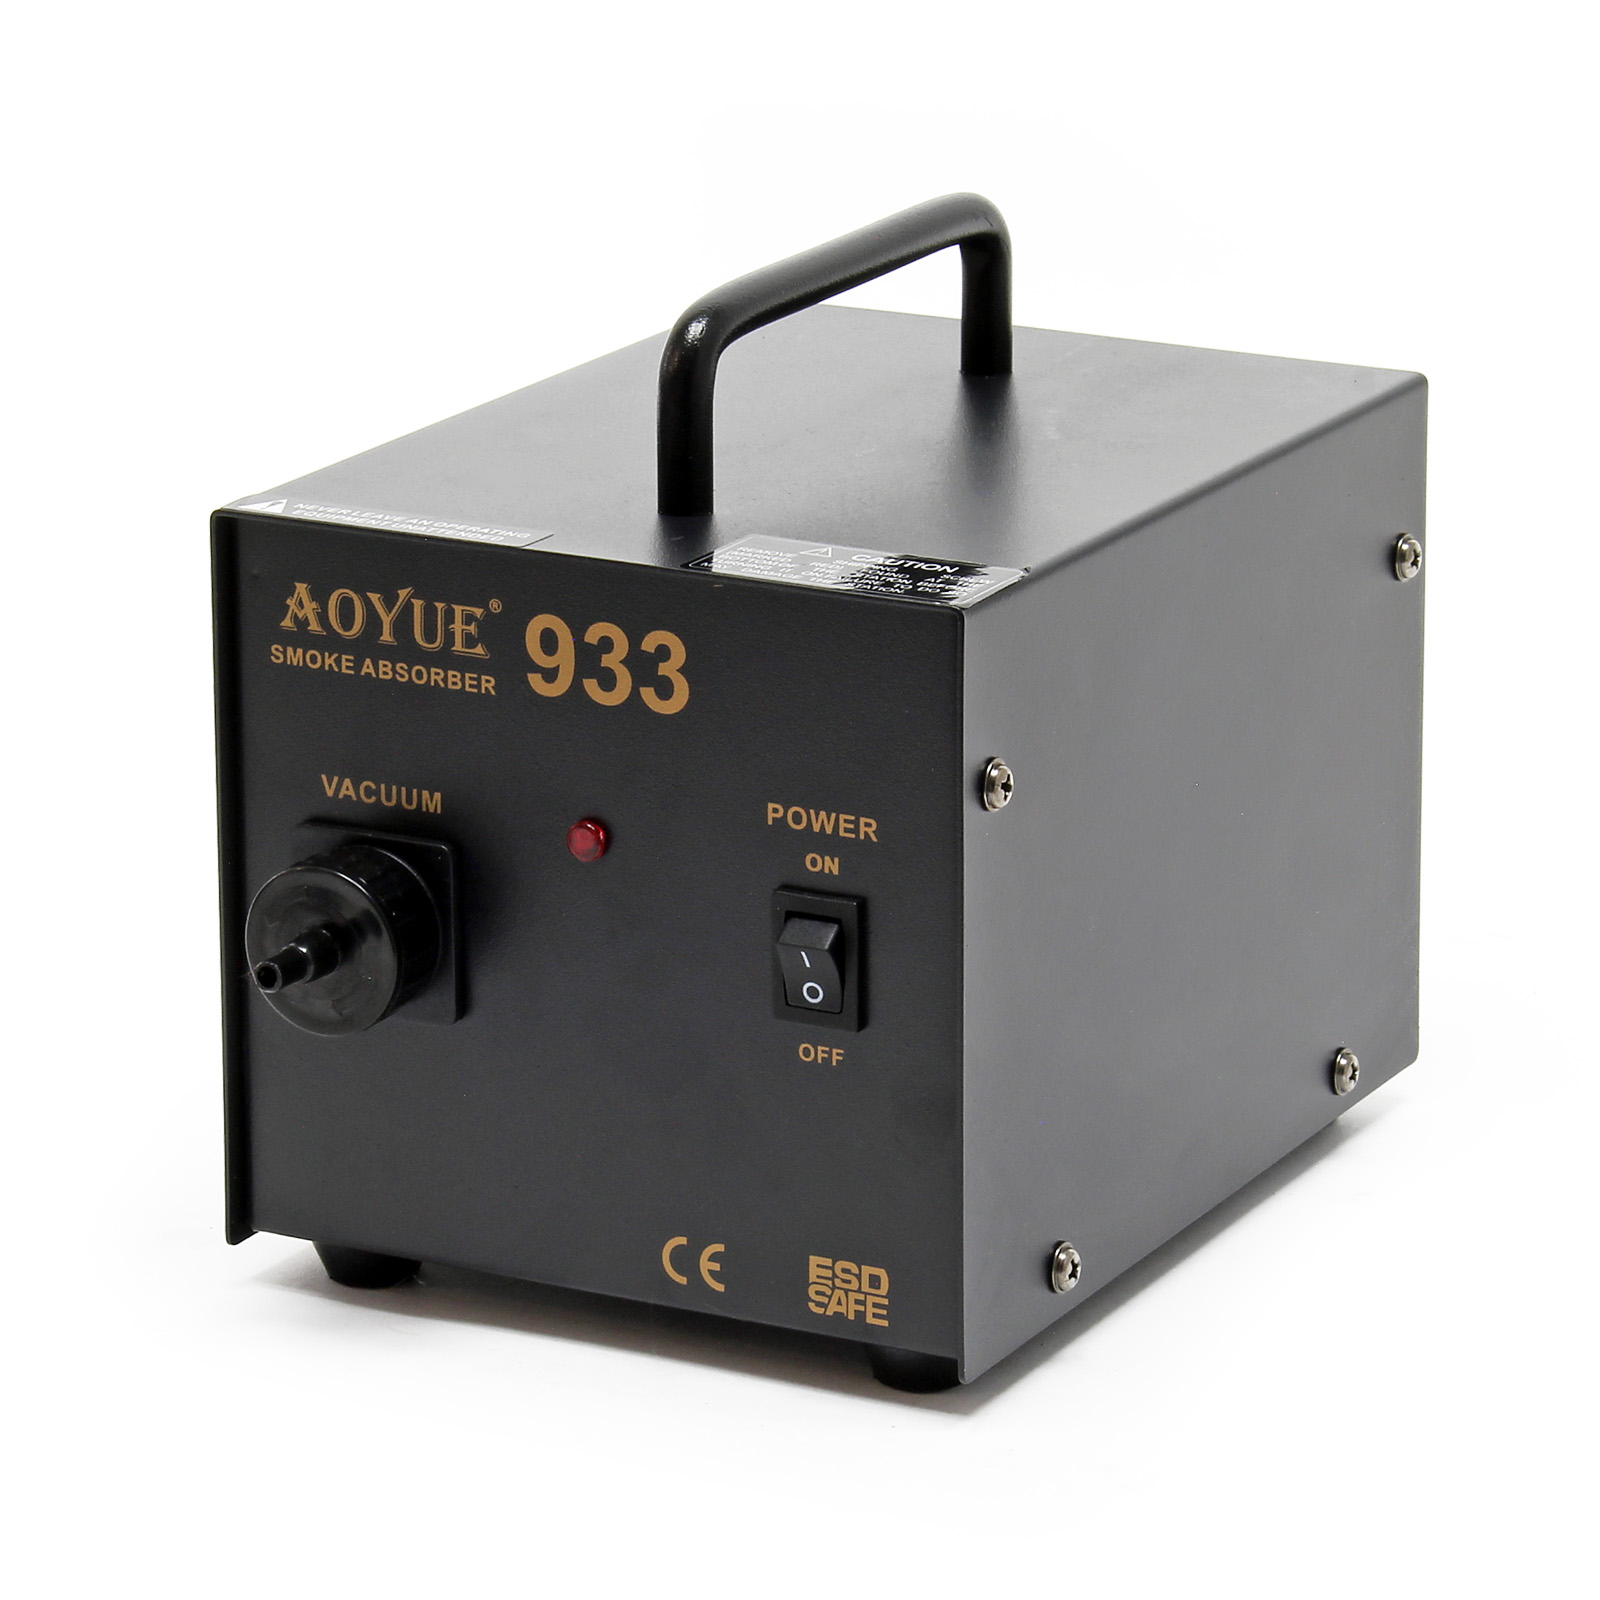 AOYUE 933 - Solder Fume Extraction System-Smoke Absorber-washable